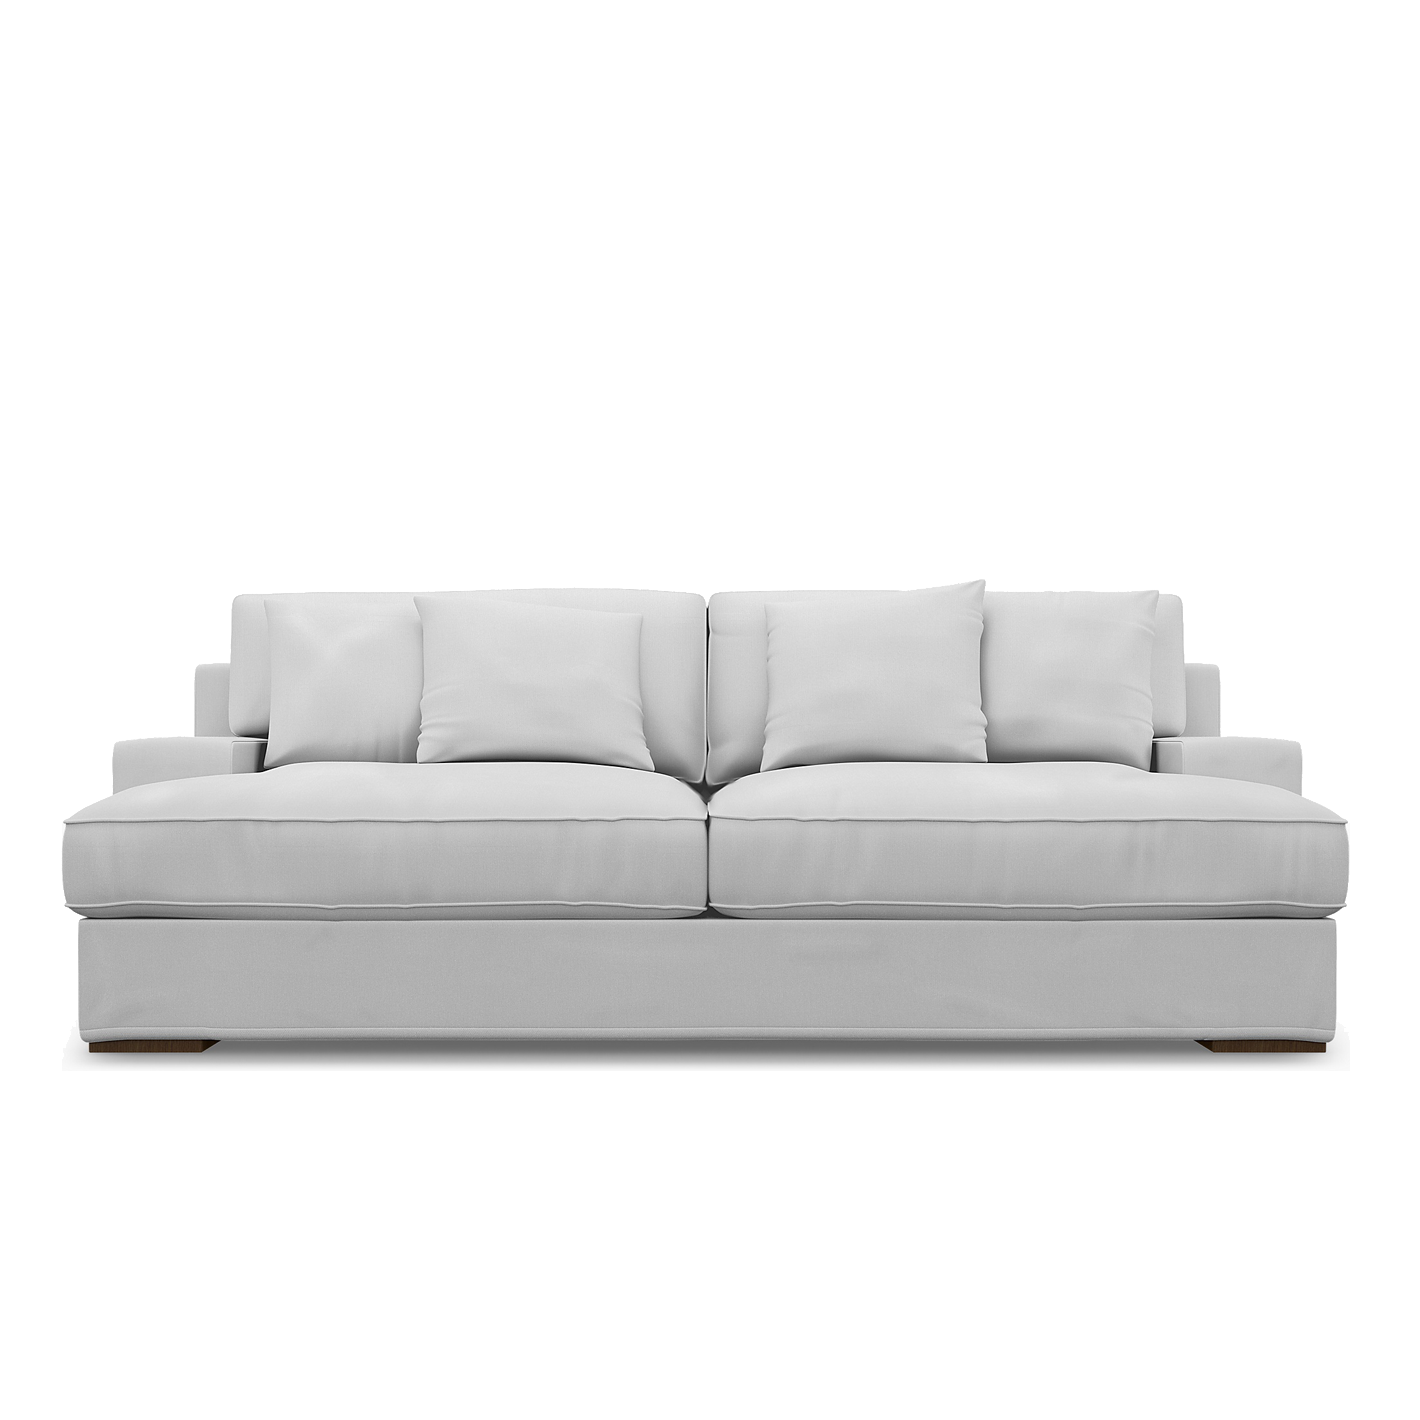 Slipcovers For Ikea Sofas Armchairs, How Many Meters To Cover A 3 Seater Sofa